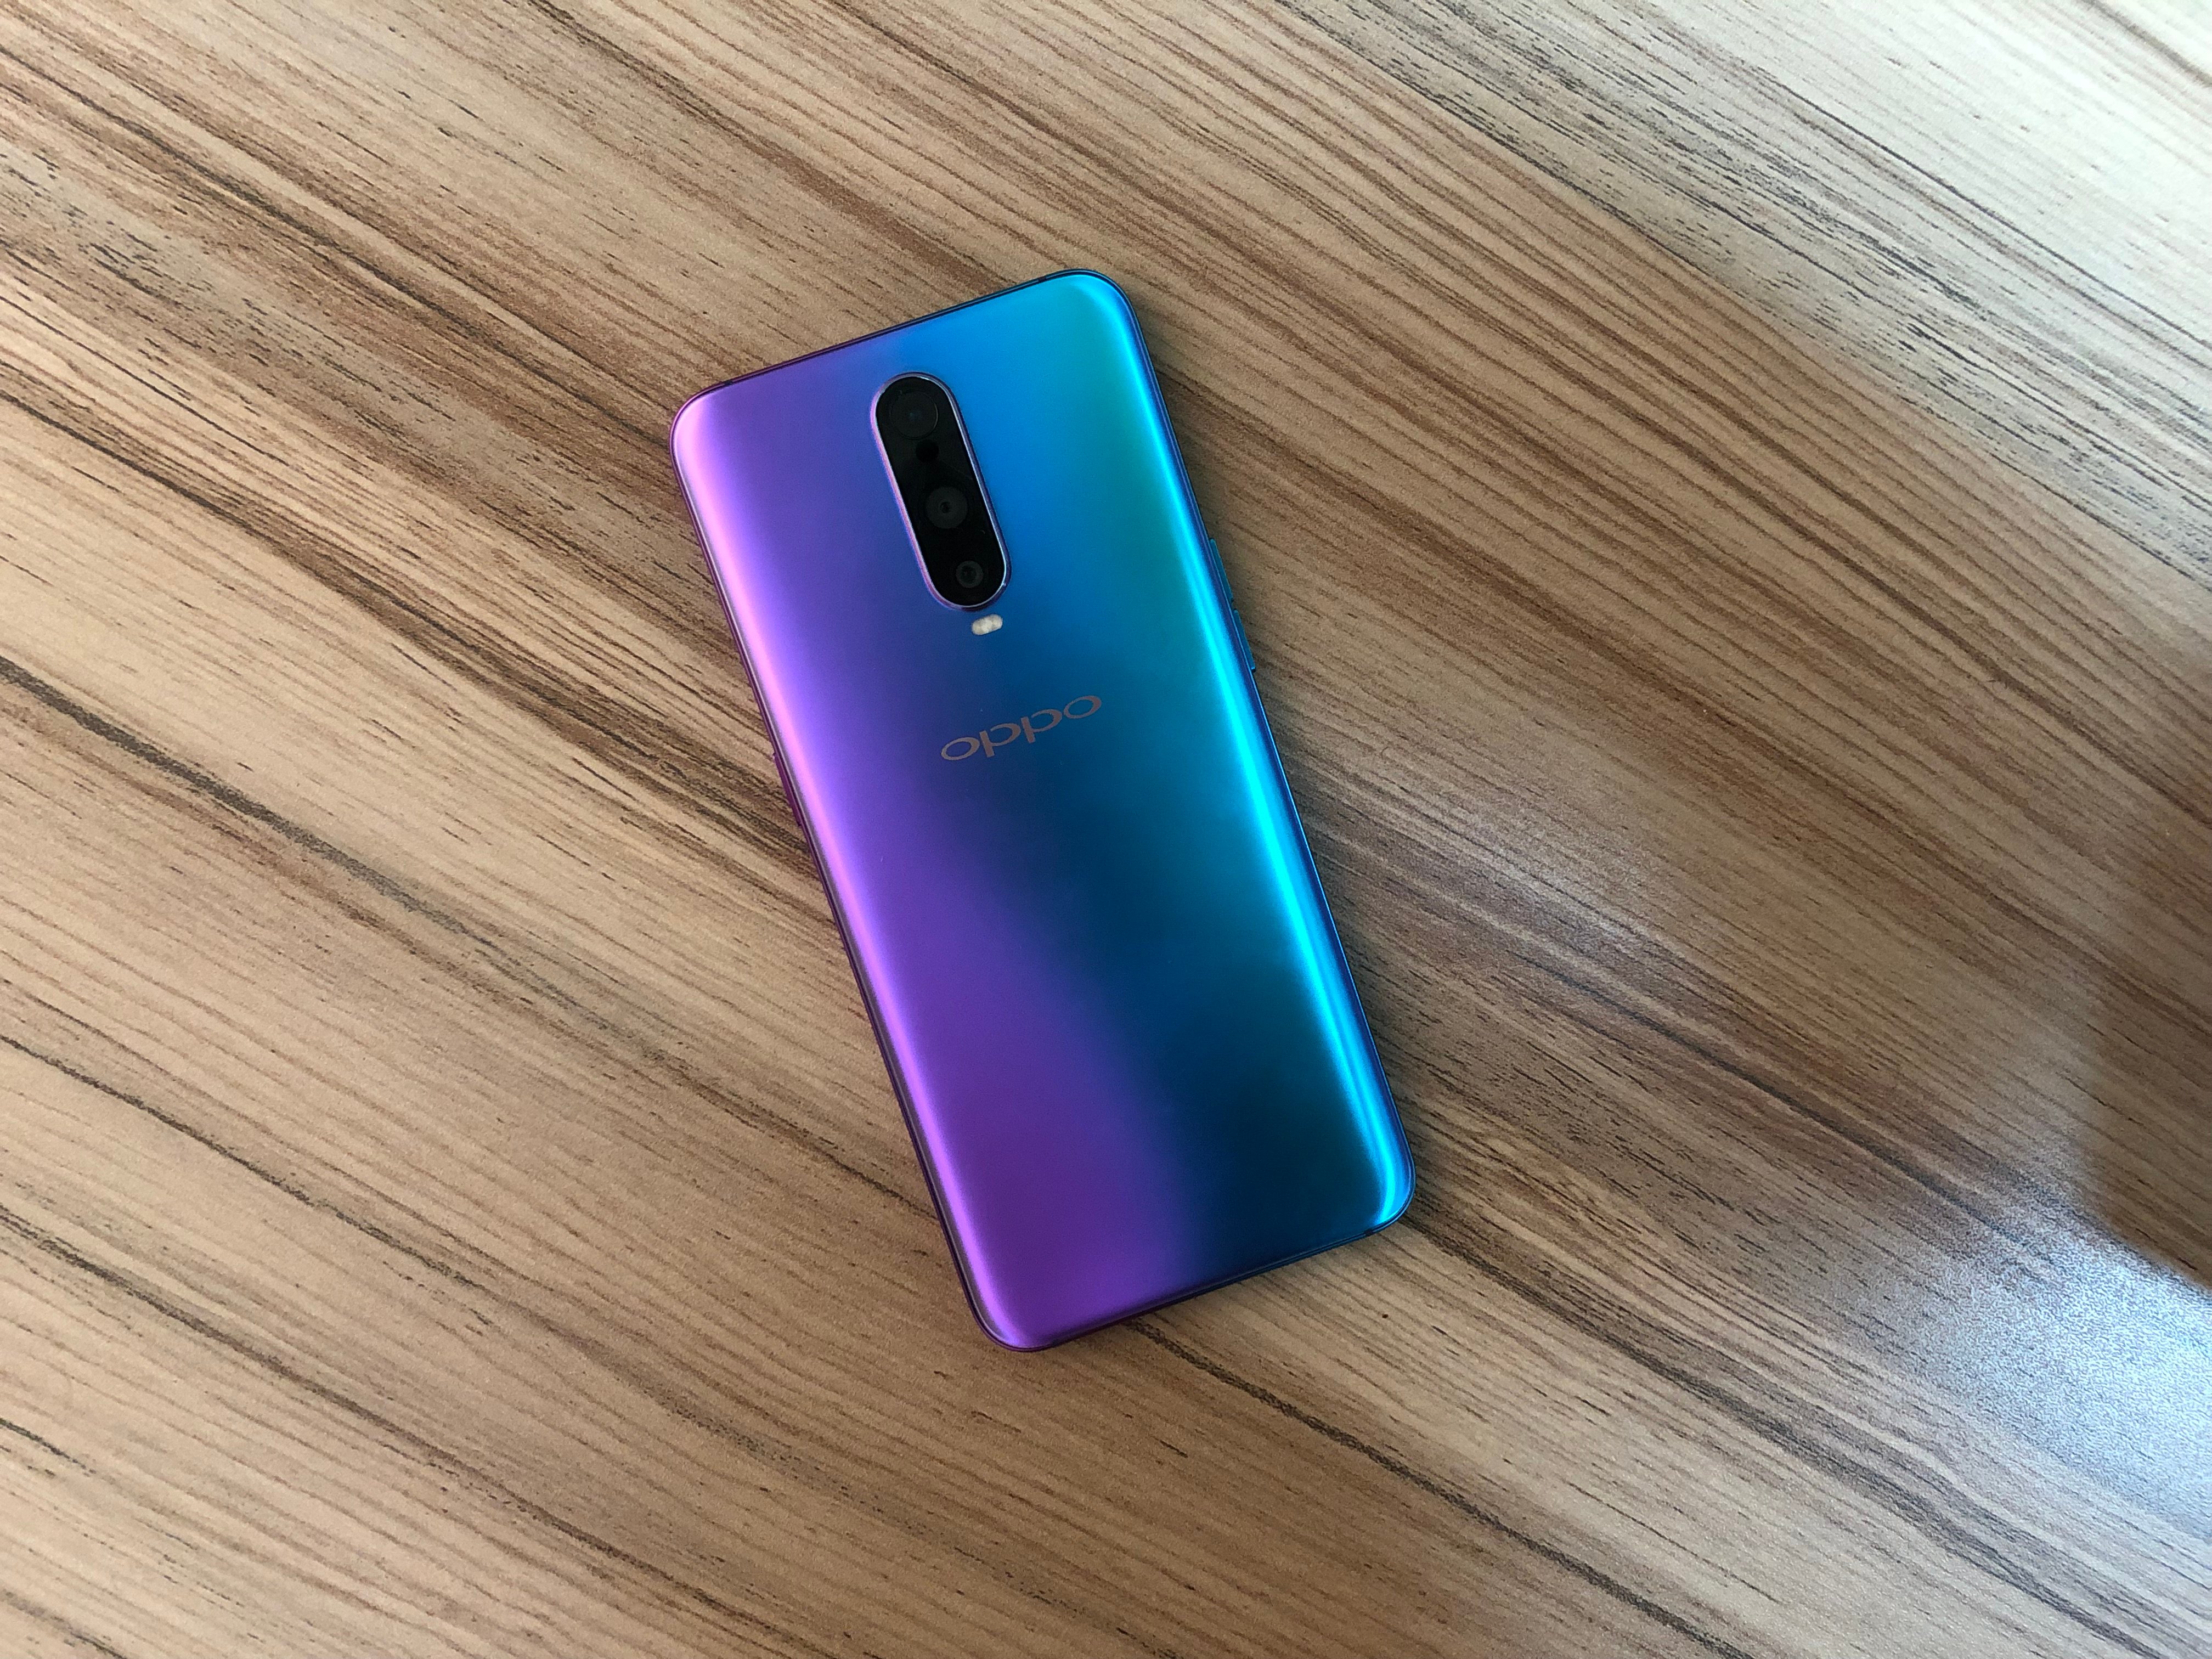 oppo r17 pro review